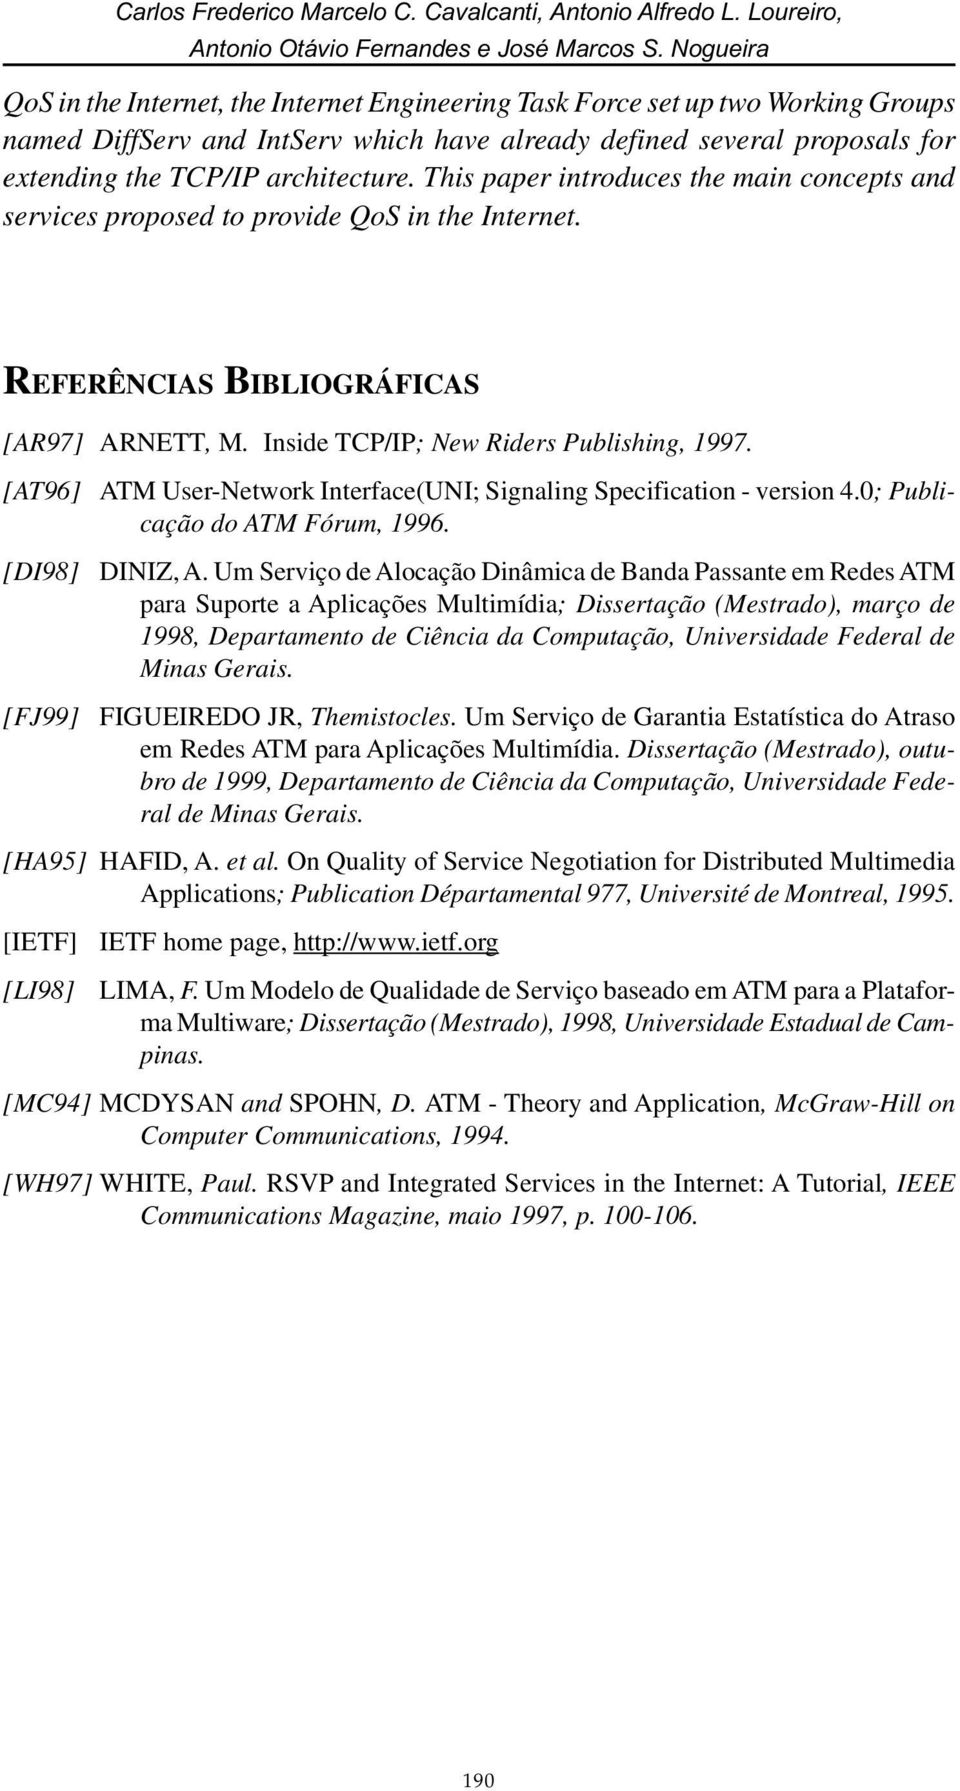 architecture. This paper introduces the main concepts and services proposed to provide QoS in the Internet. REFERÊNCIAS BIBLIOGRÁFICAS [AR97] ARNETT, M. Inside TCP/IP; New Riders Publishing, 1997.